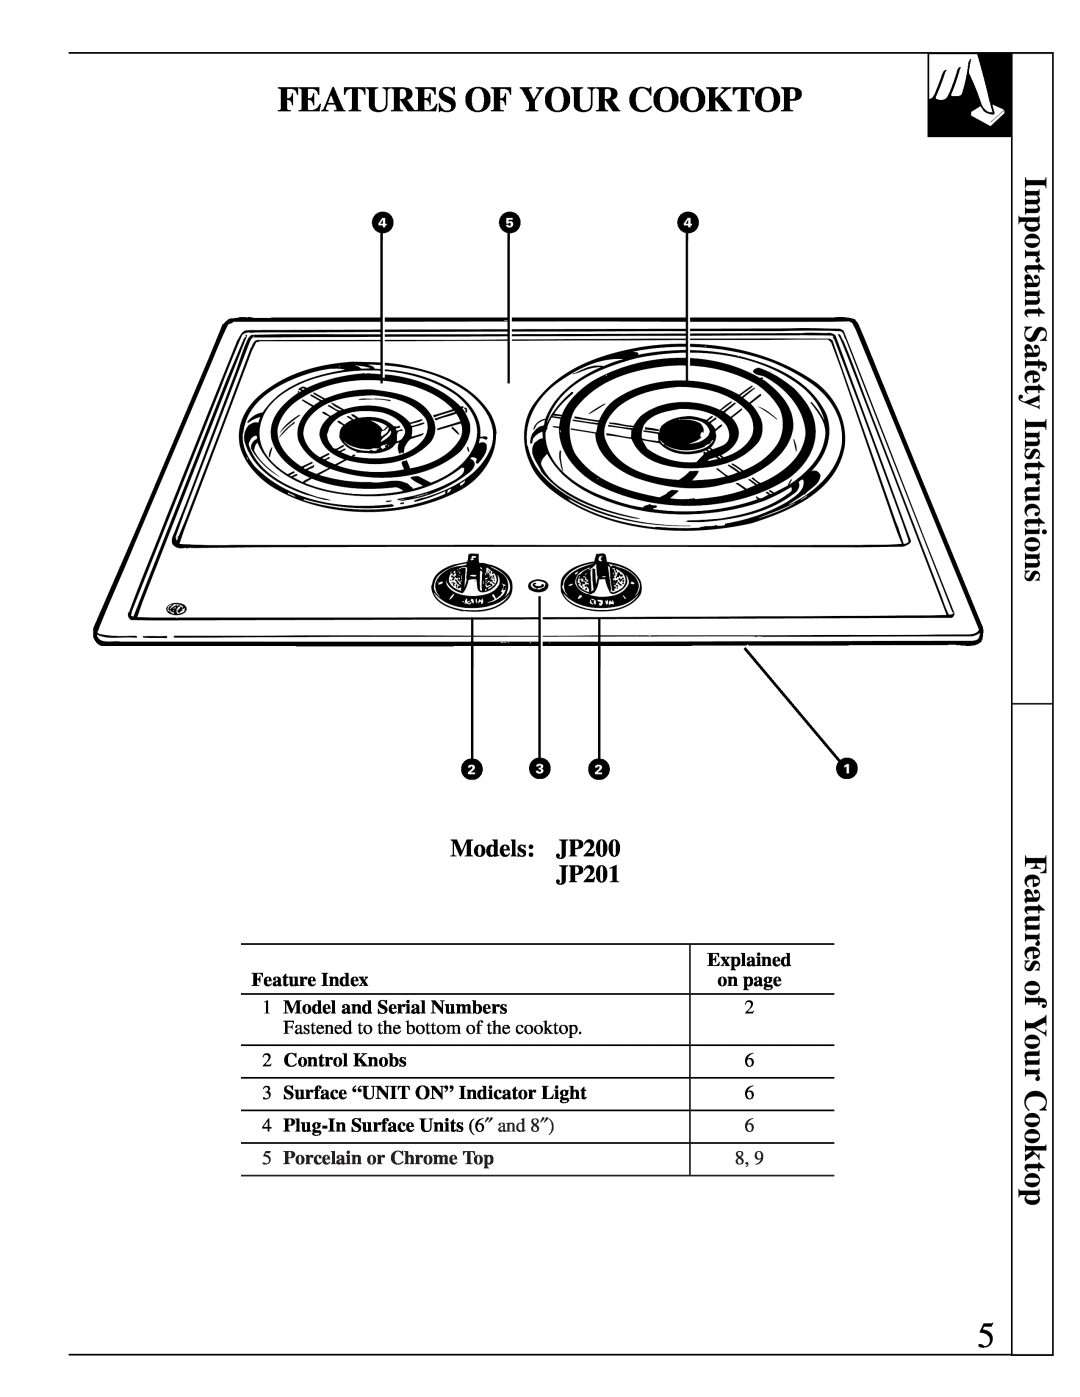 GE JP201 Features Of Your Cooktop, Important Safety Instructions Features of Your Cooktop, Models JP200, Explained 